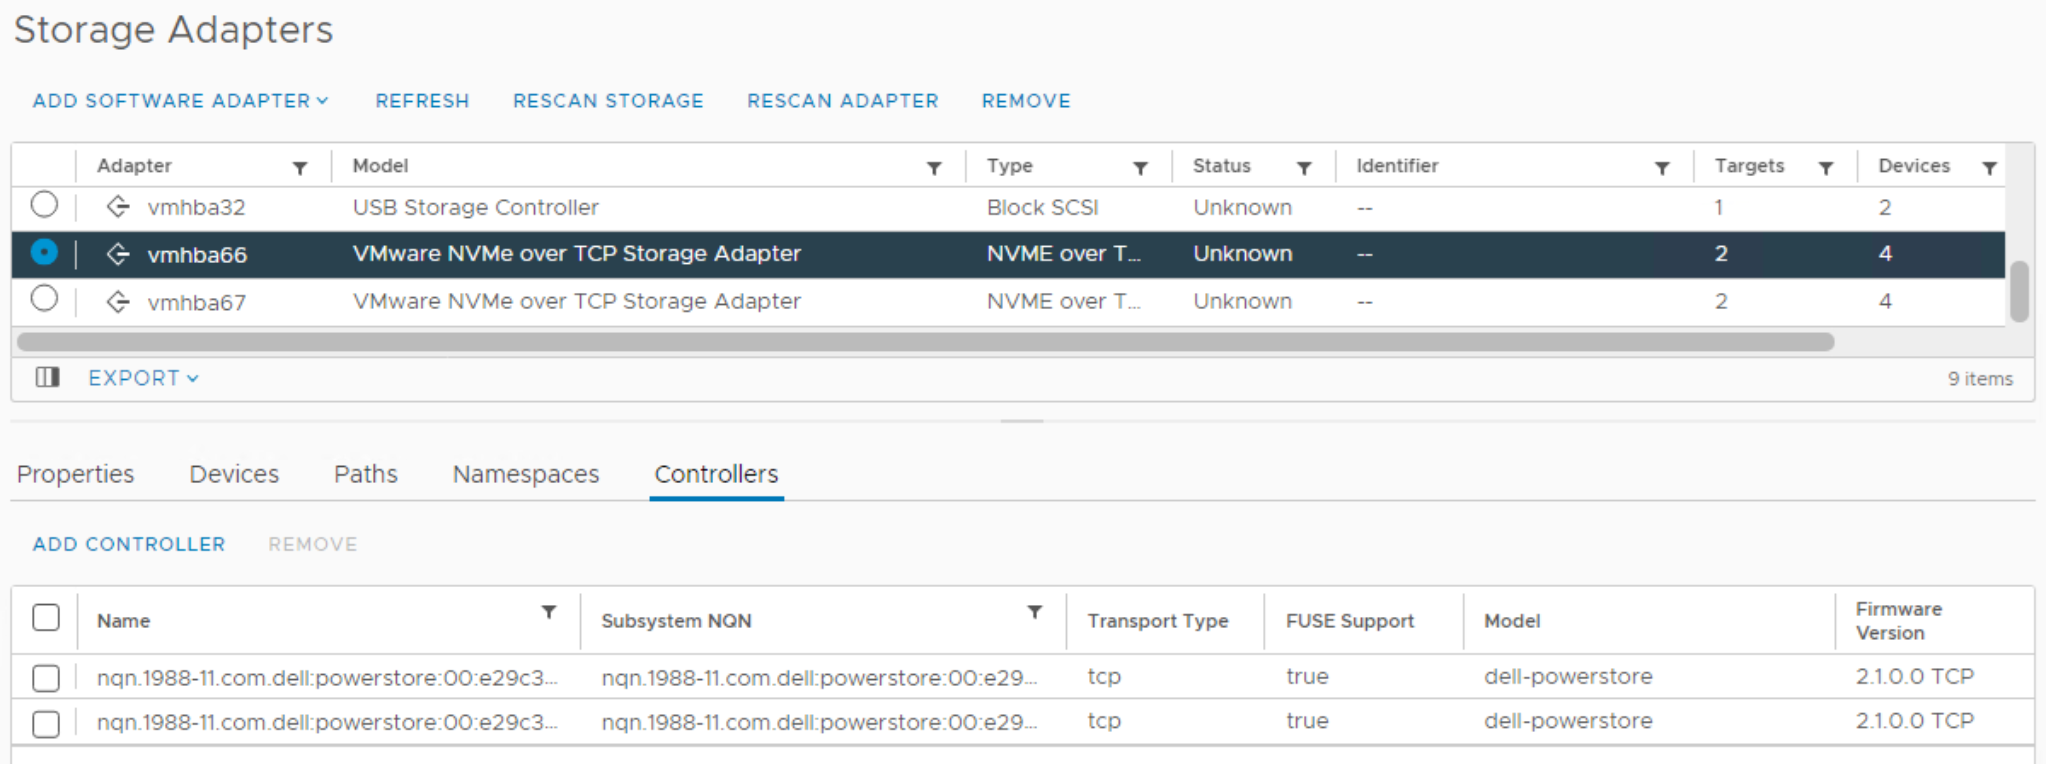 Storage Adapters in the vSphere Client. vmhba66 is highlighted which reveals two Controllers below.